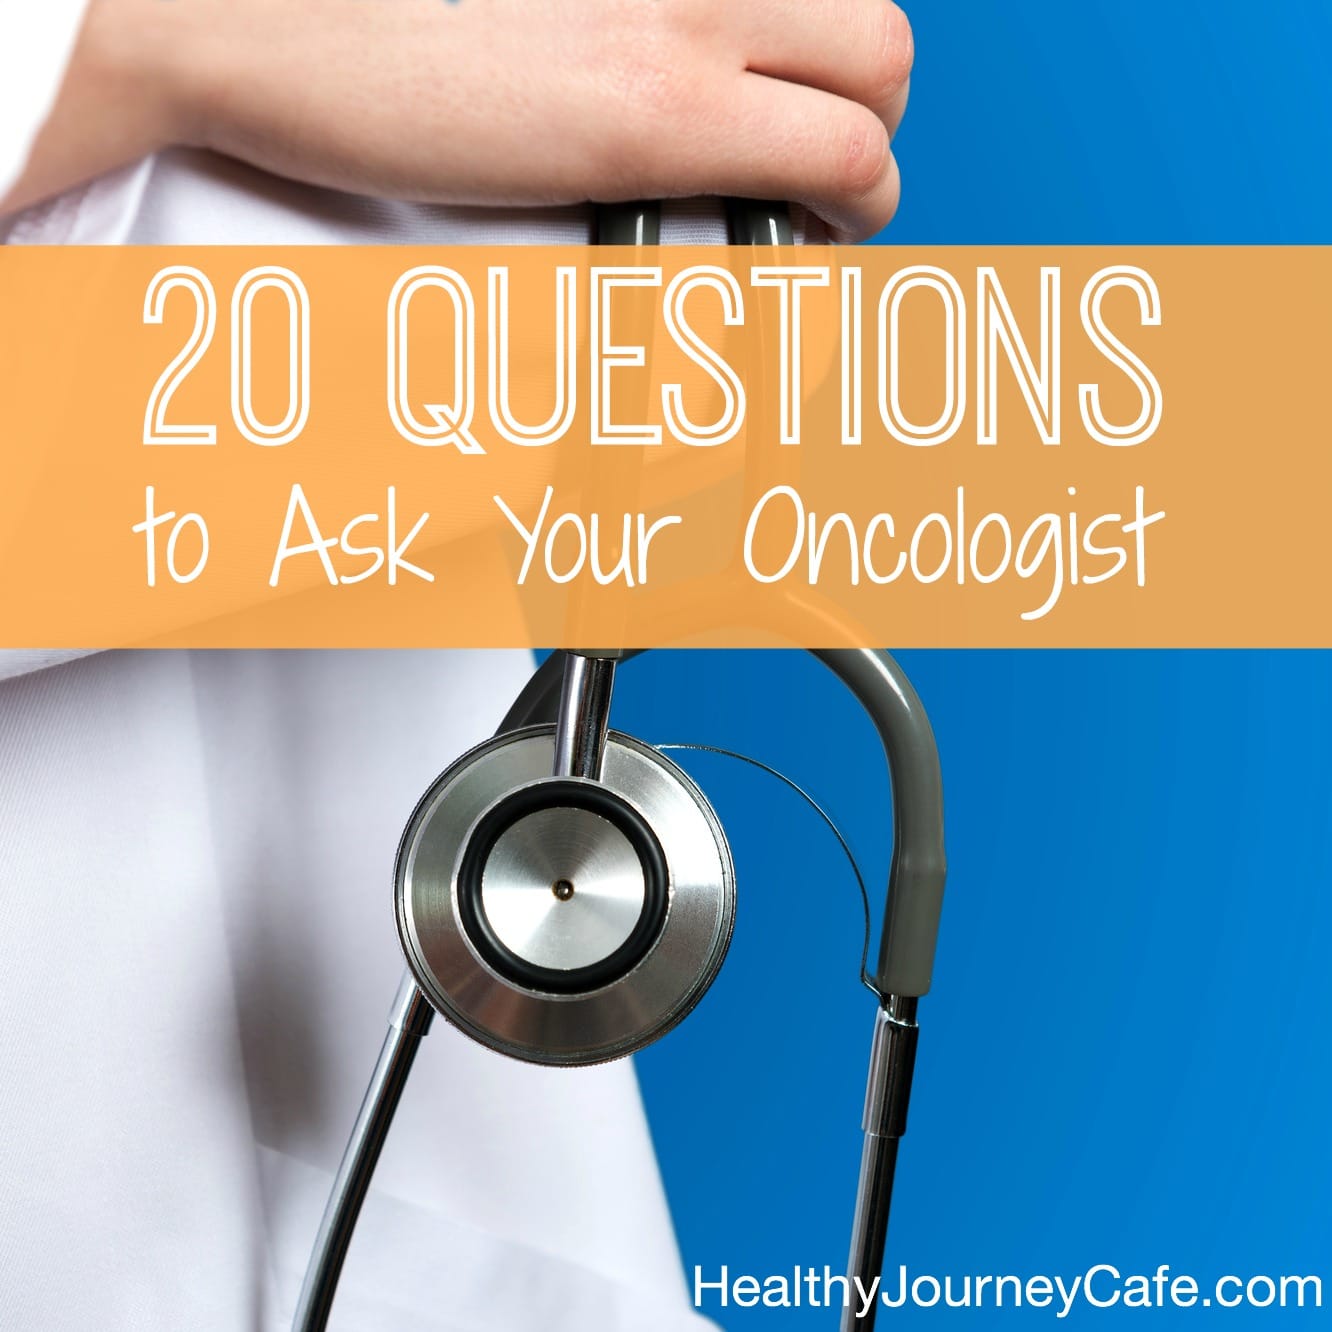 20 Questions to Ask Your Oncologist ~ Healthy Journey Cafe